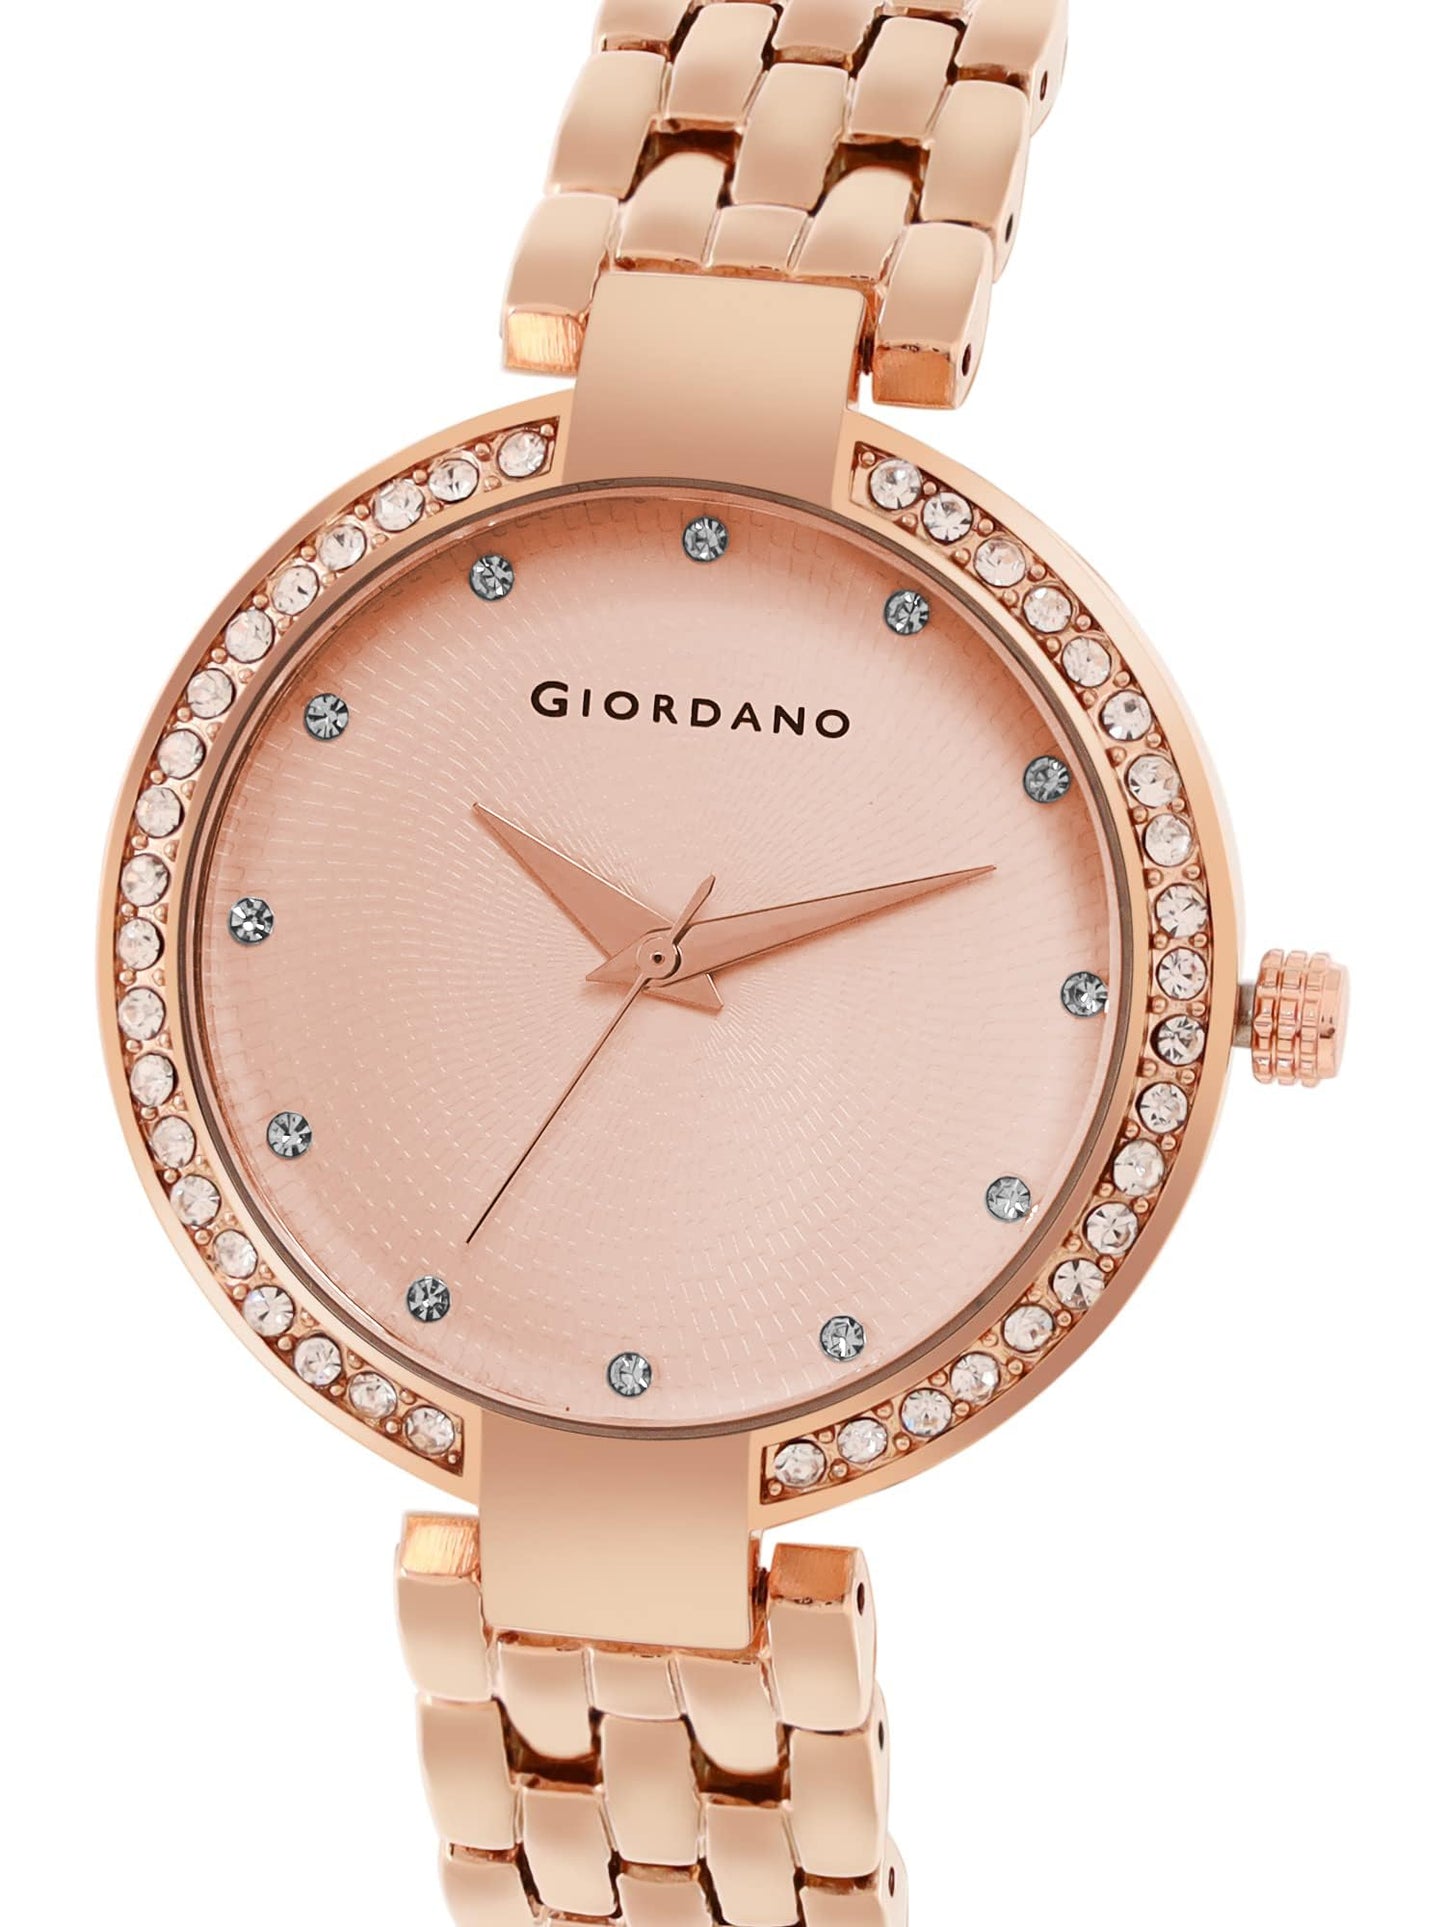 Giordano Fashionista Analogue Watch for Women Stylish Metal Strap, Diamond Studded Dial Ladies Wrist Watch 3 Hand, Ideal Gift for Female - GD-2141 (Full Rose Gold)